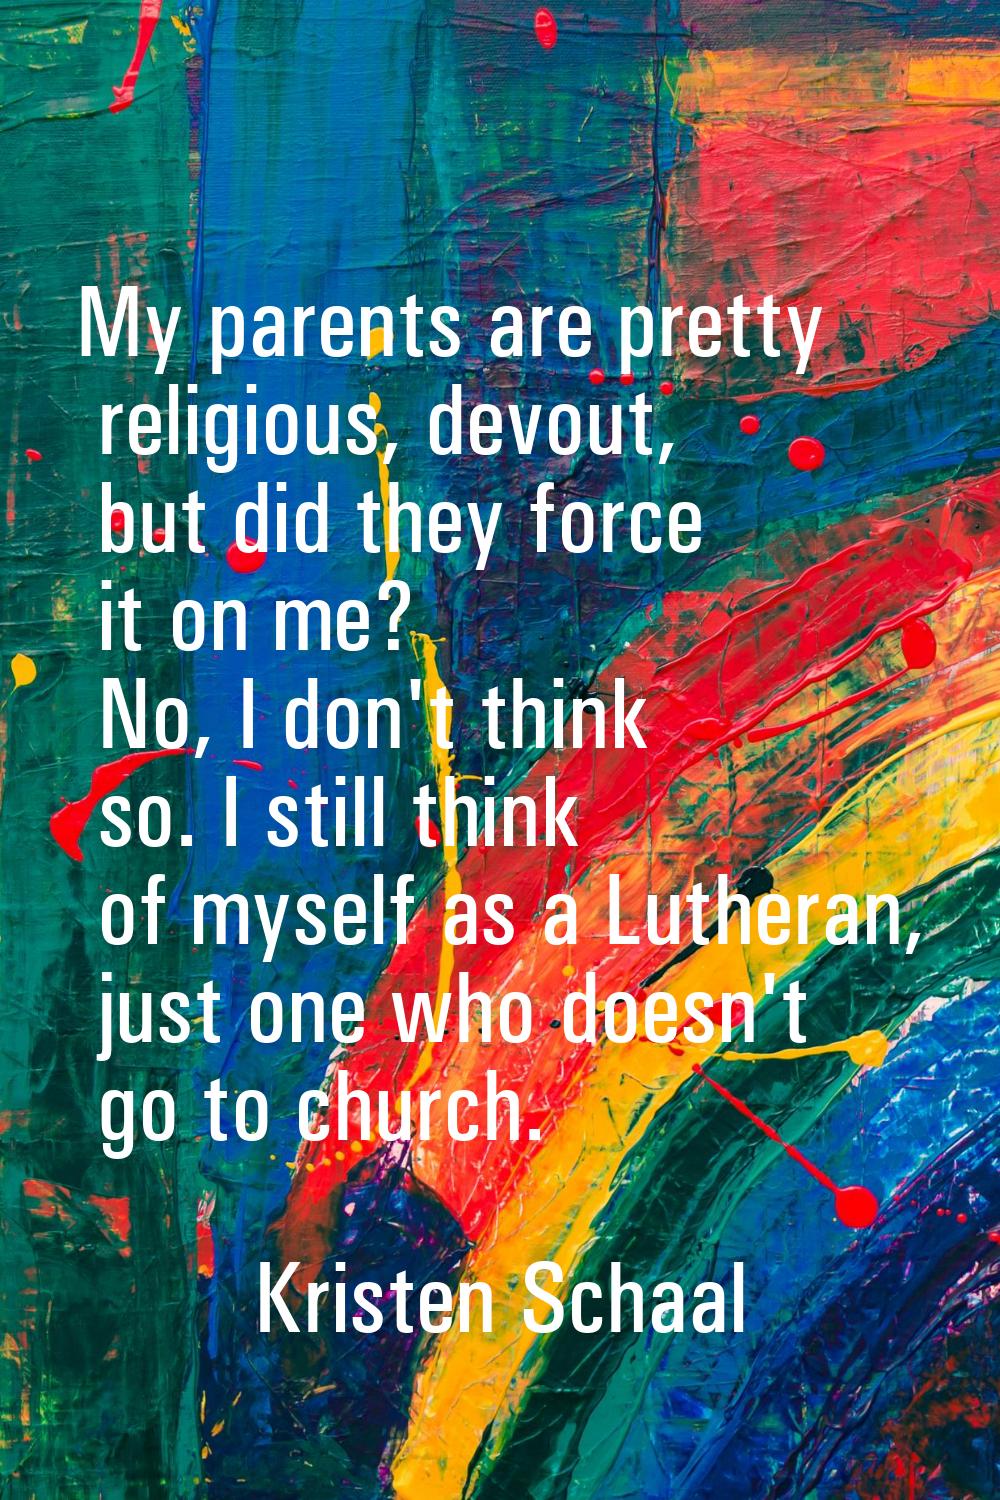 My parents are pretty religious, devout, but did they force it on me? No, I don't think so. I still